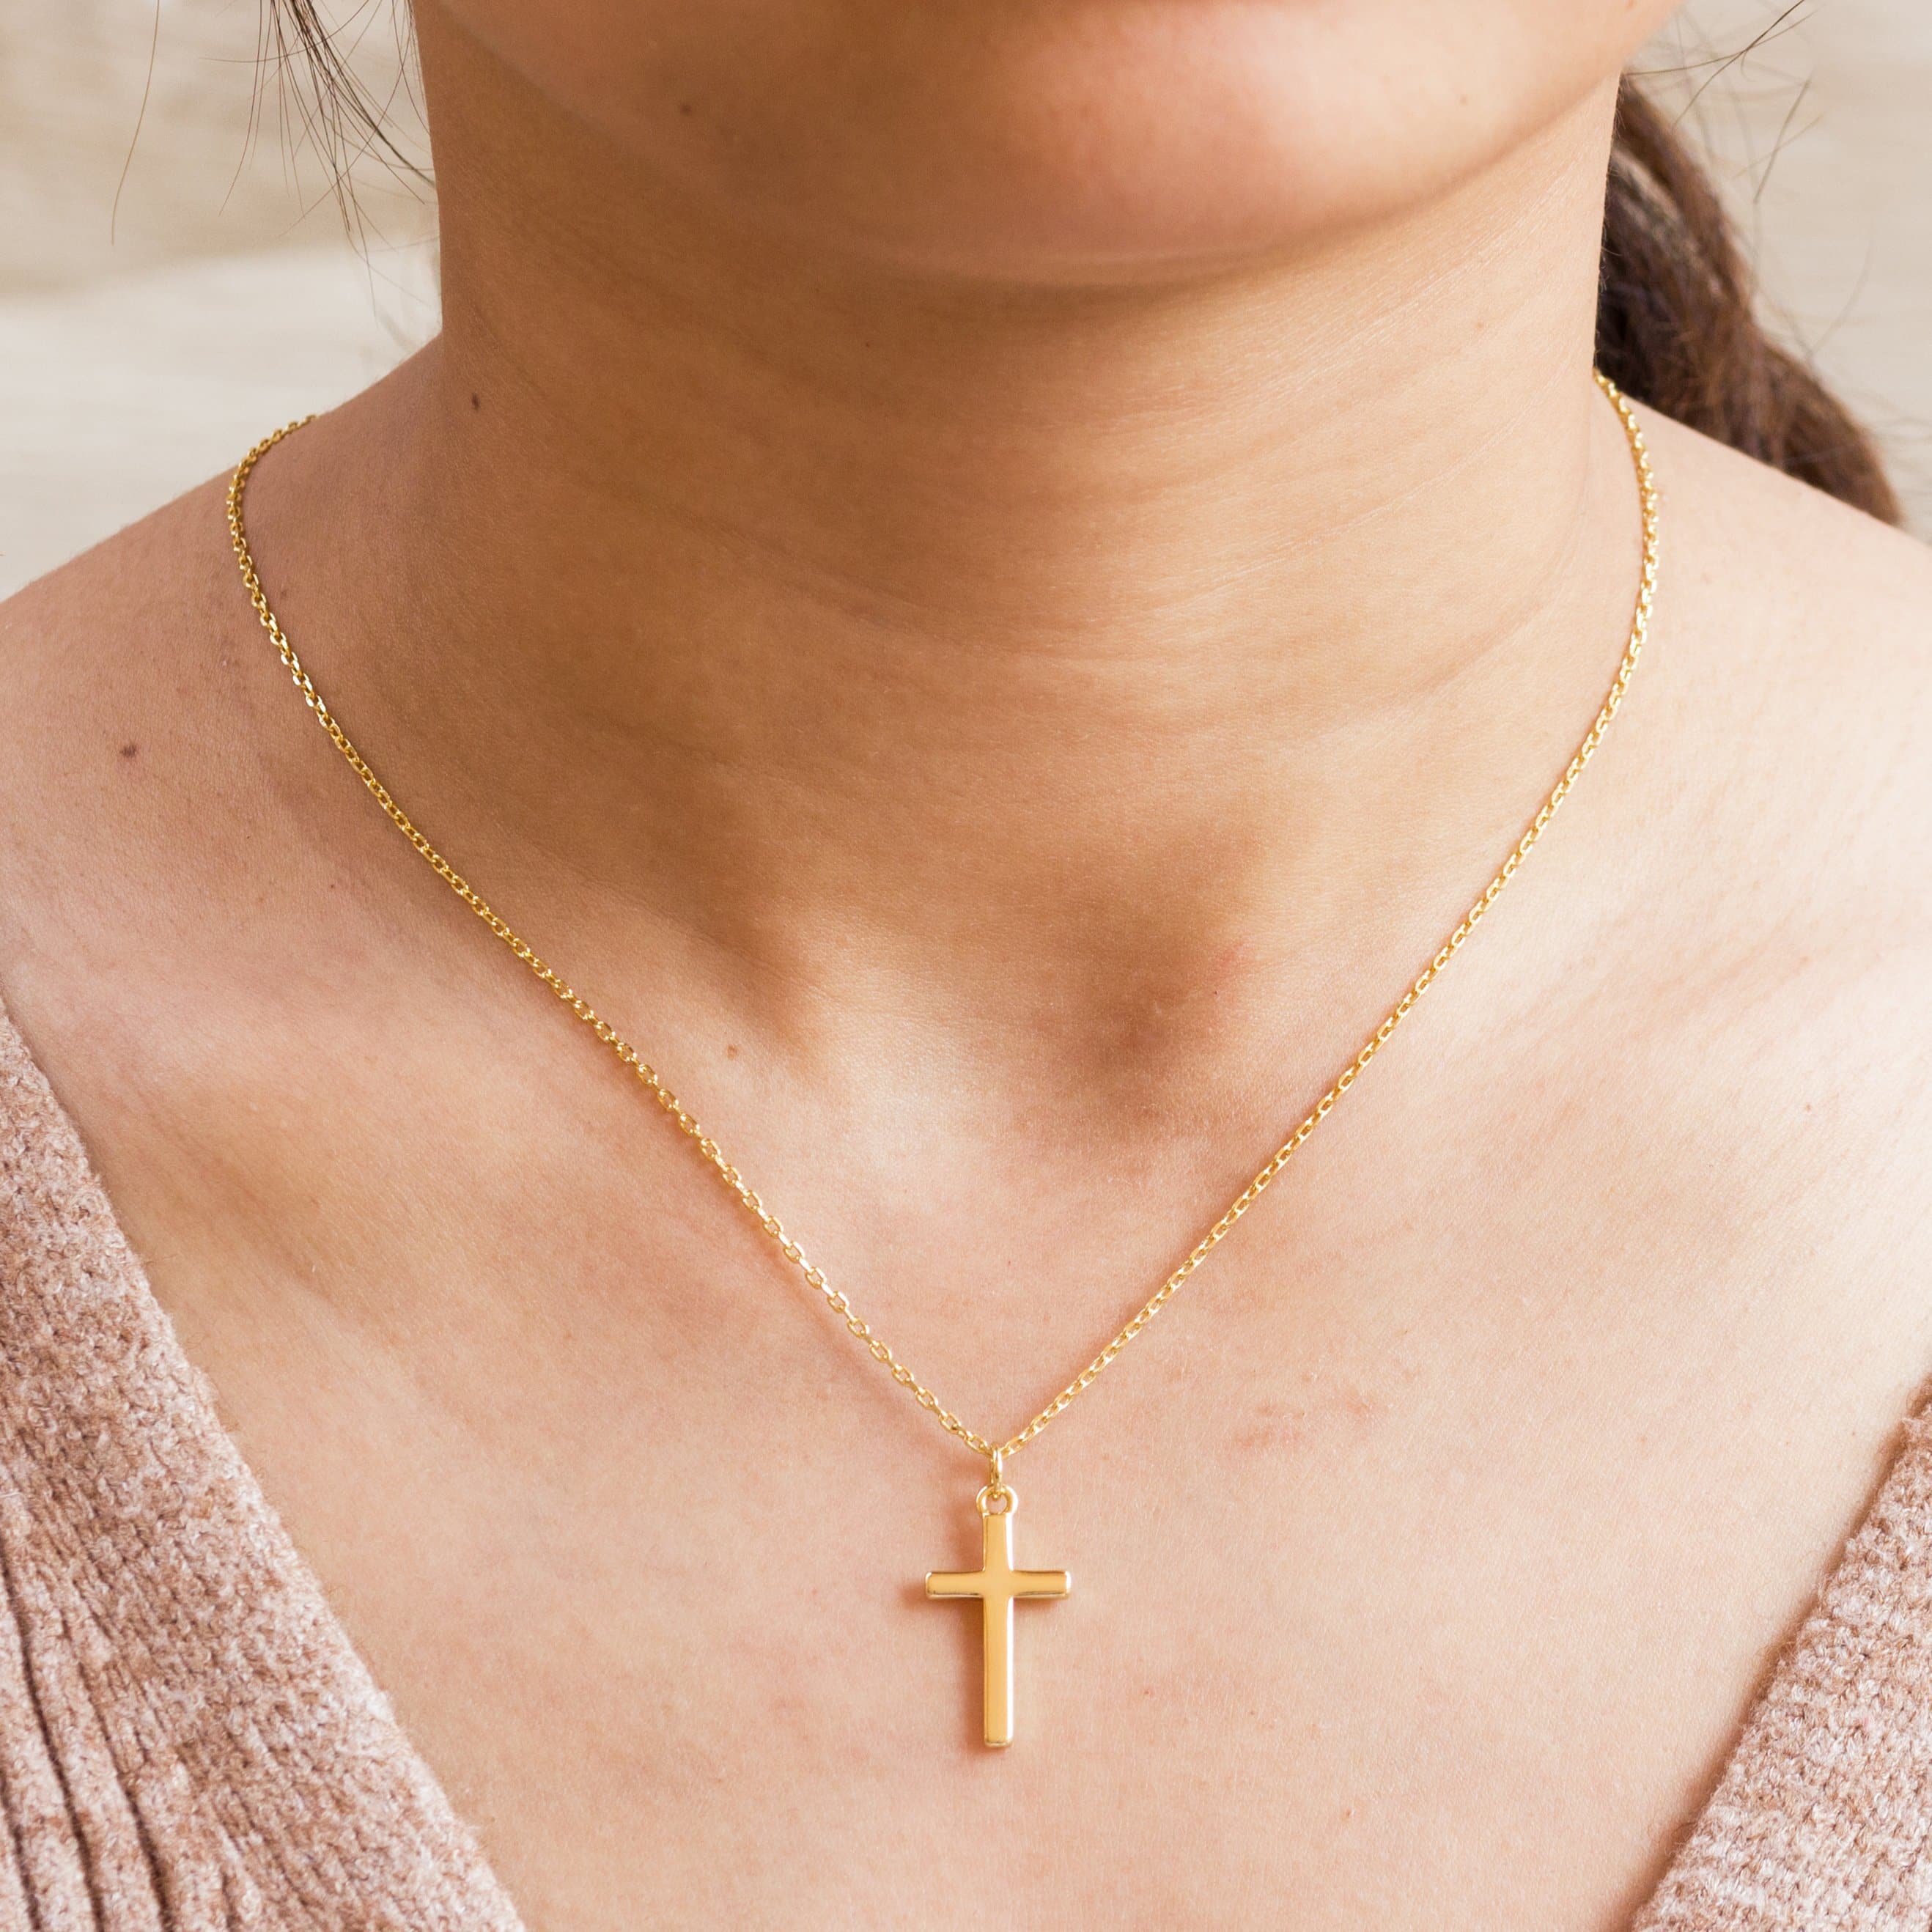 Brand New Authentic 24k Gold Necklace Gold plated Cross necklace Women &  Men | eBay